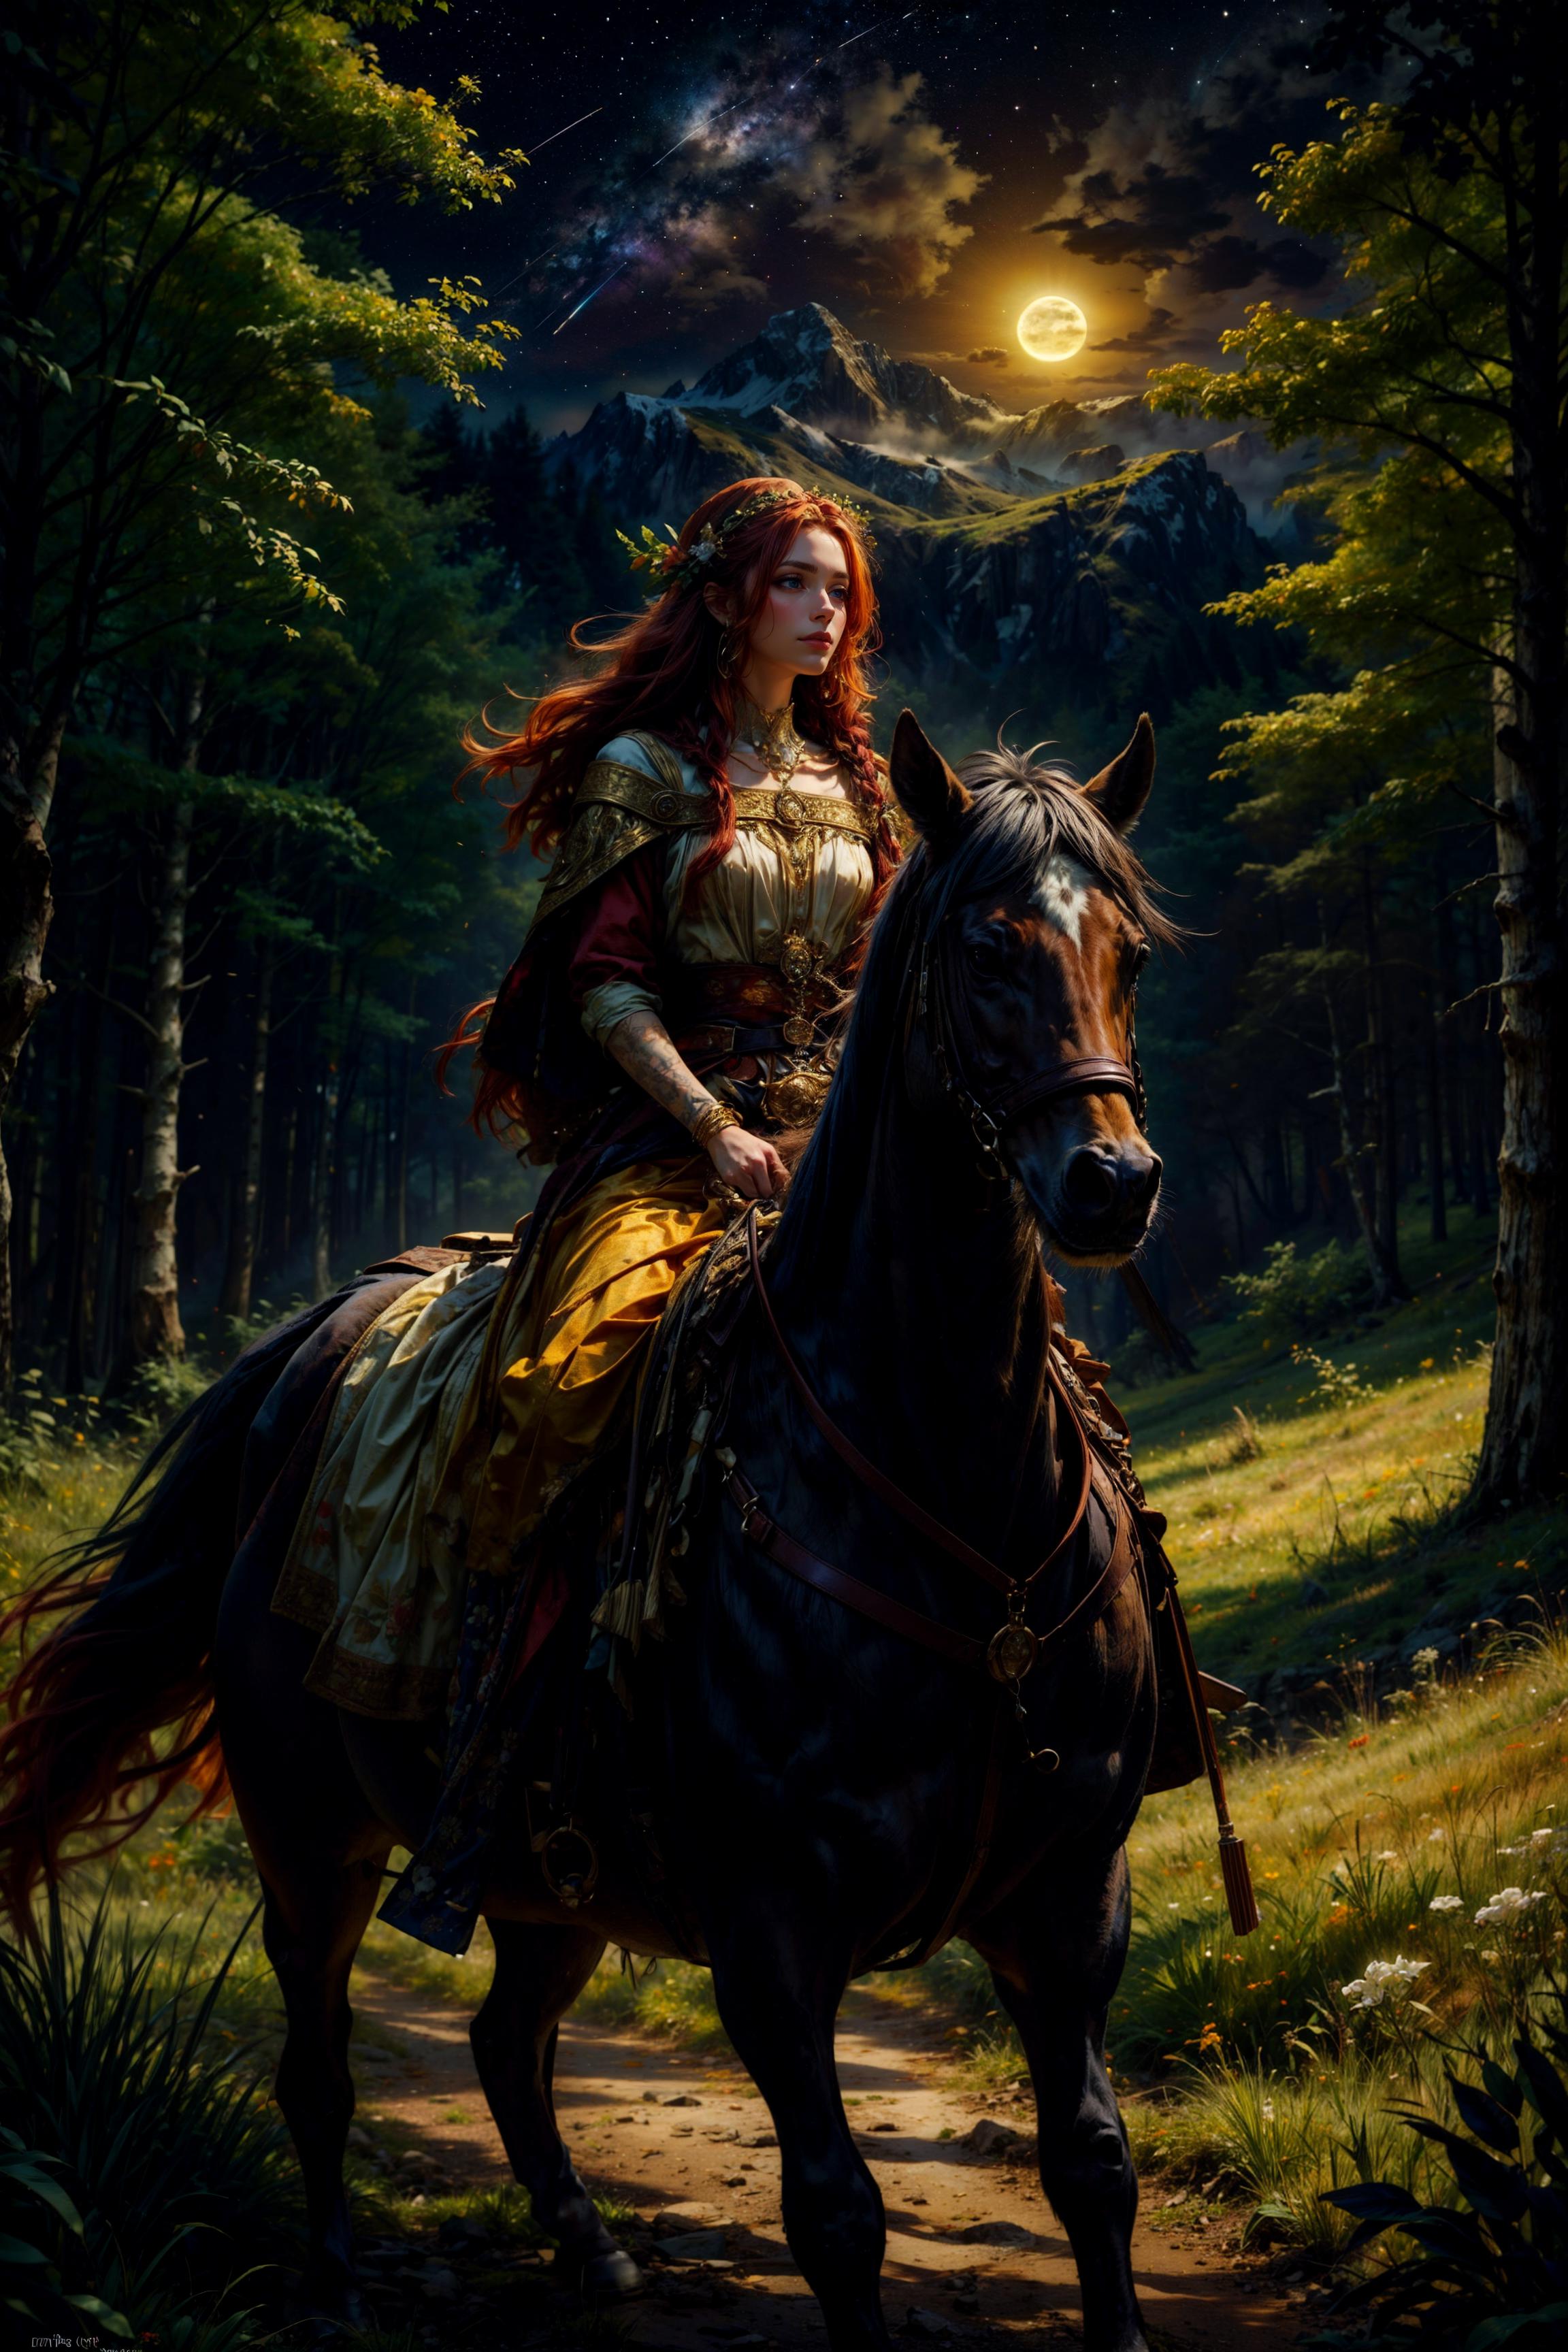 A woman in a flowing dress with long red hair riding a horse through a forest.